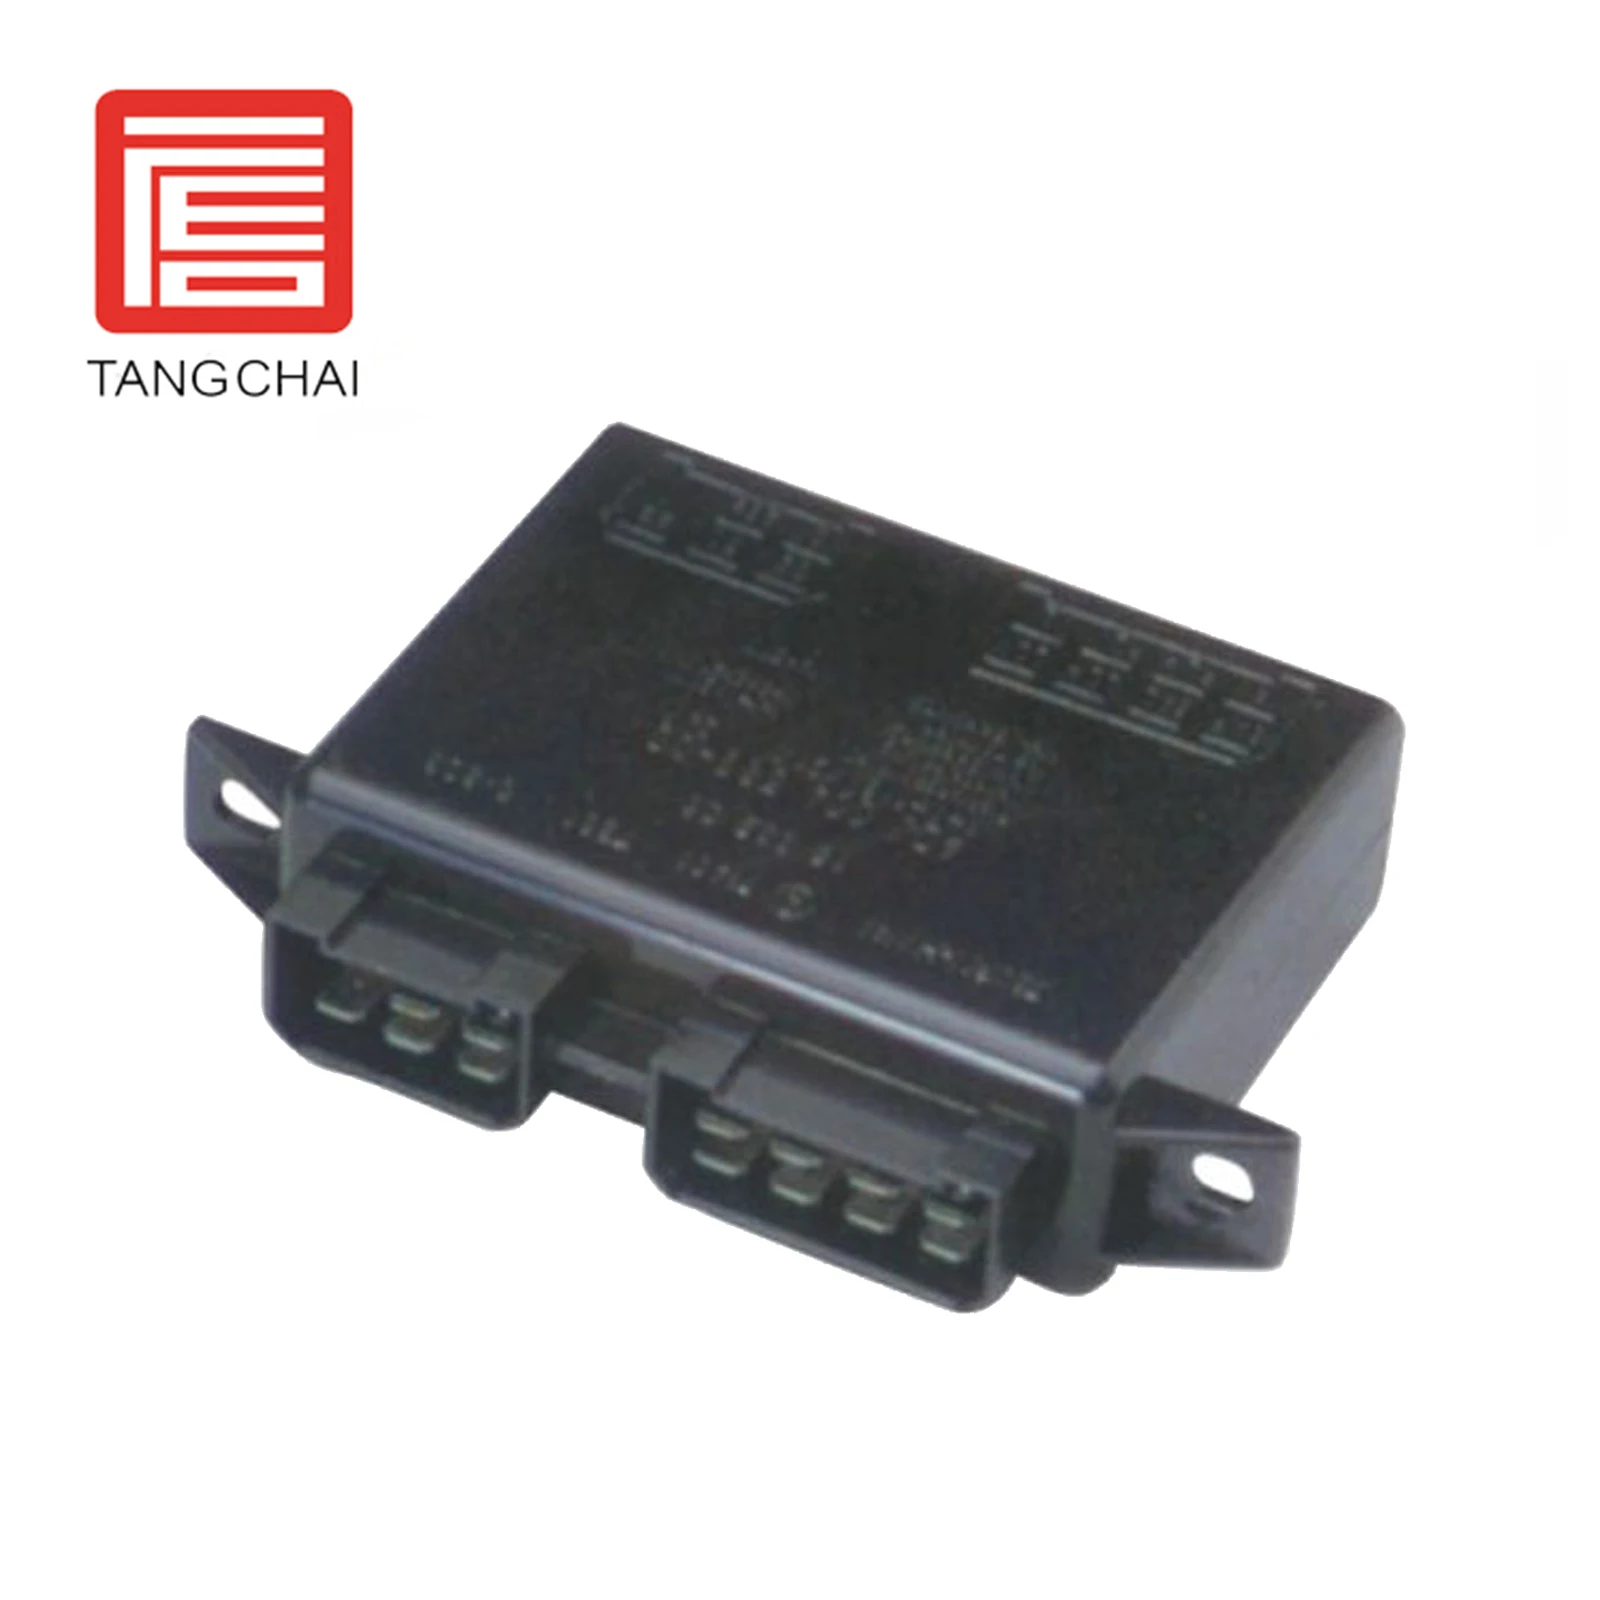 

Tangchai Turn sigal relay flasher 4DJ004589-00 1593506 for ruck parts